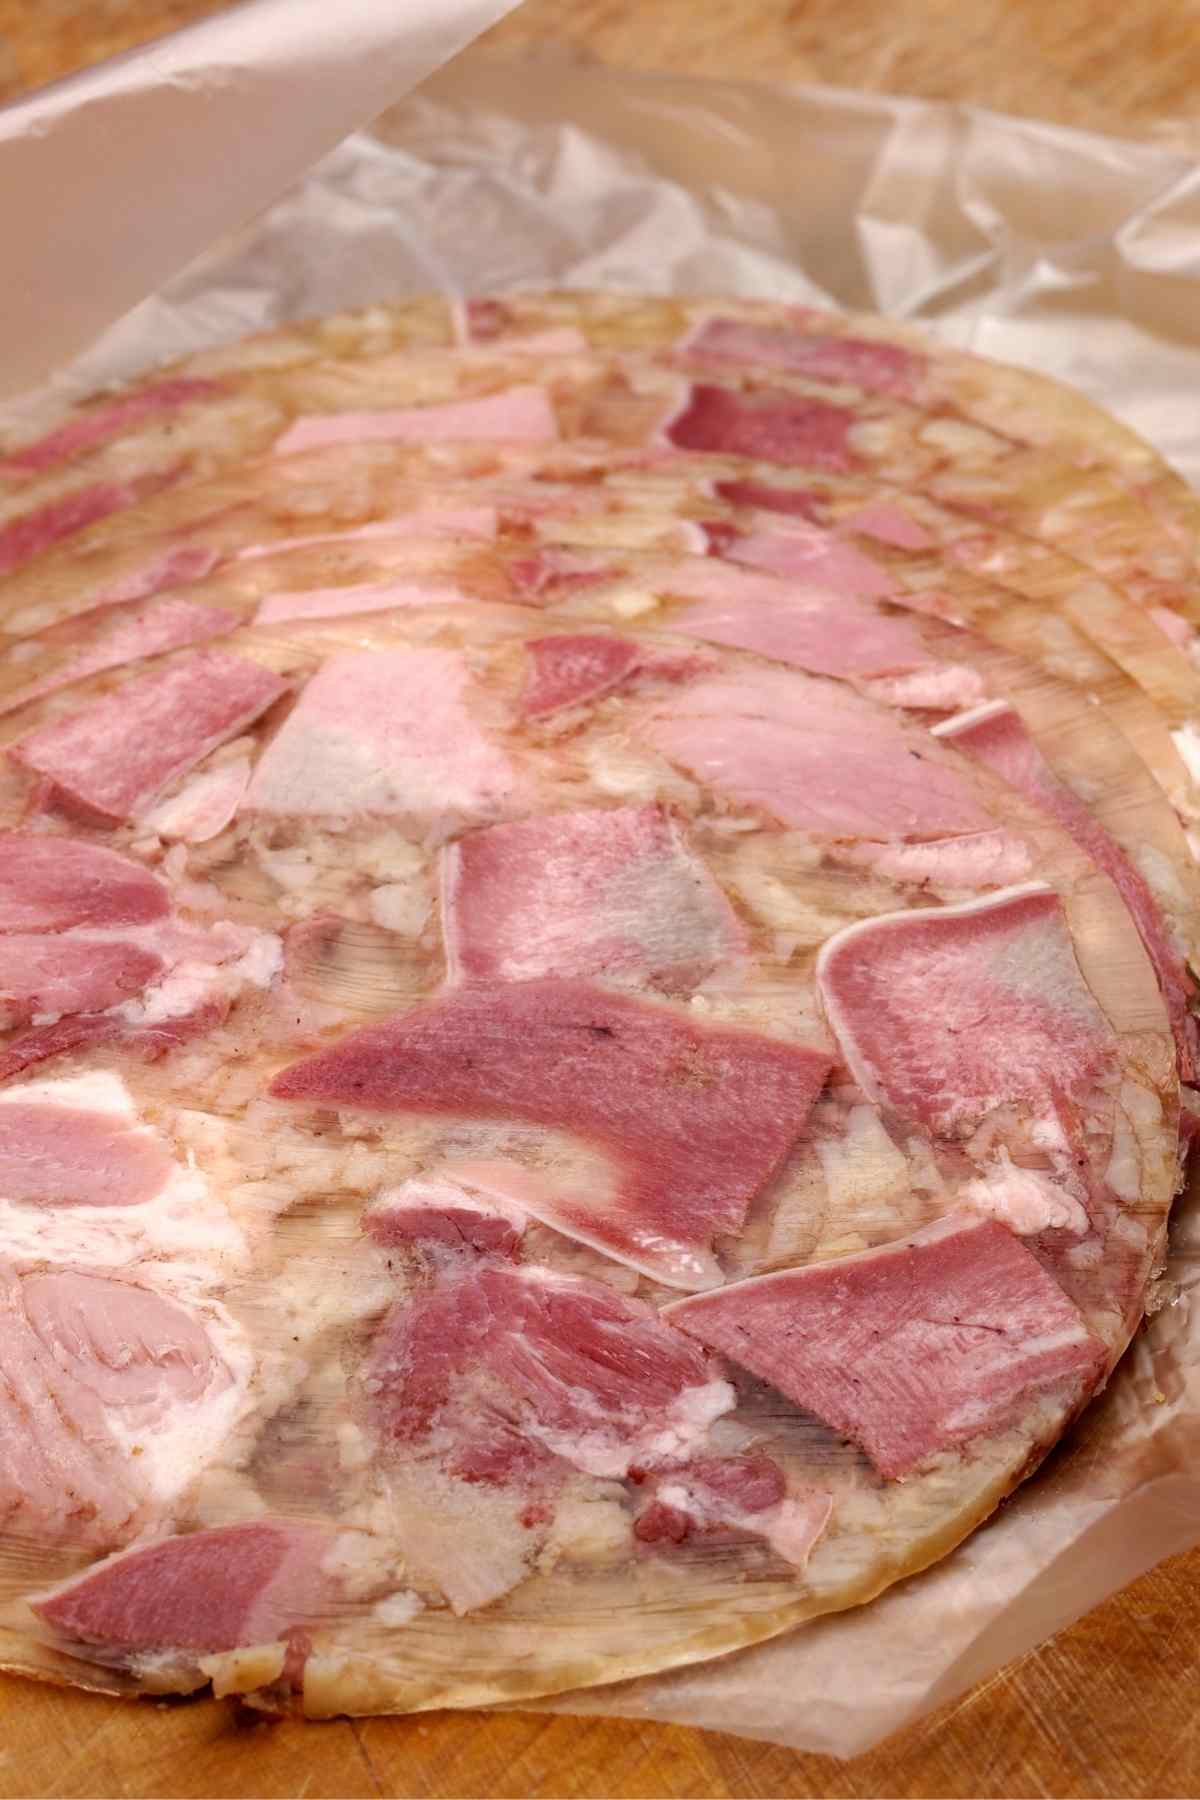 The name says it all! If you’re not familiar with Head Cheese, you’re about to be! It’s a European meat jelly made with the head of a pig or calf. However, despite its name - it resembles more of a large sausage or cold-cut terrine. Plus, it contains no dairy at all!